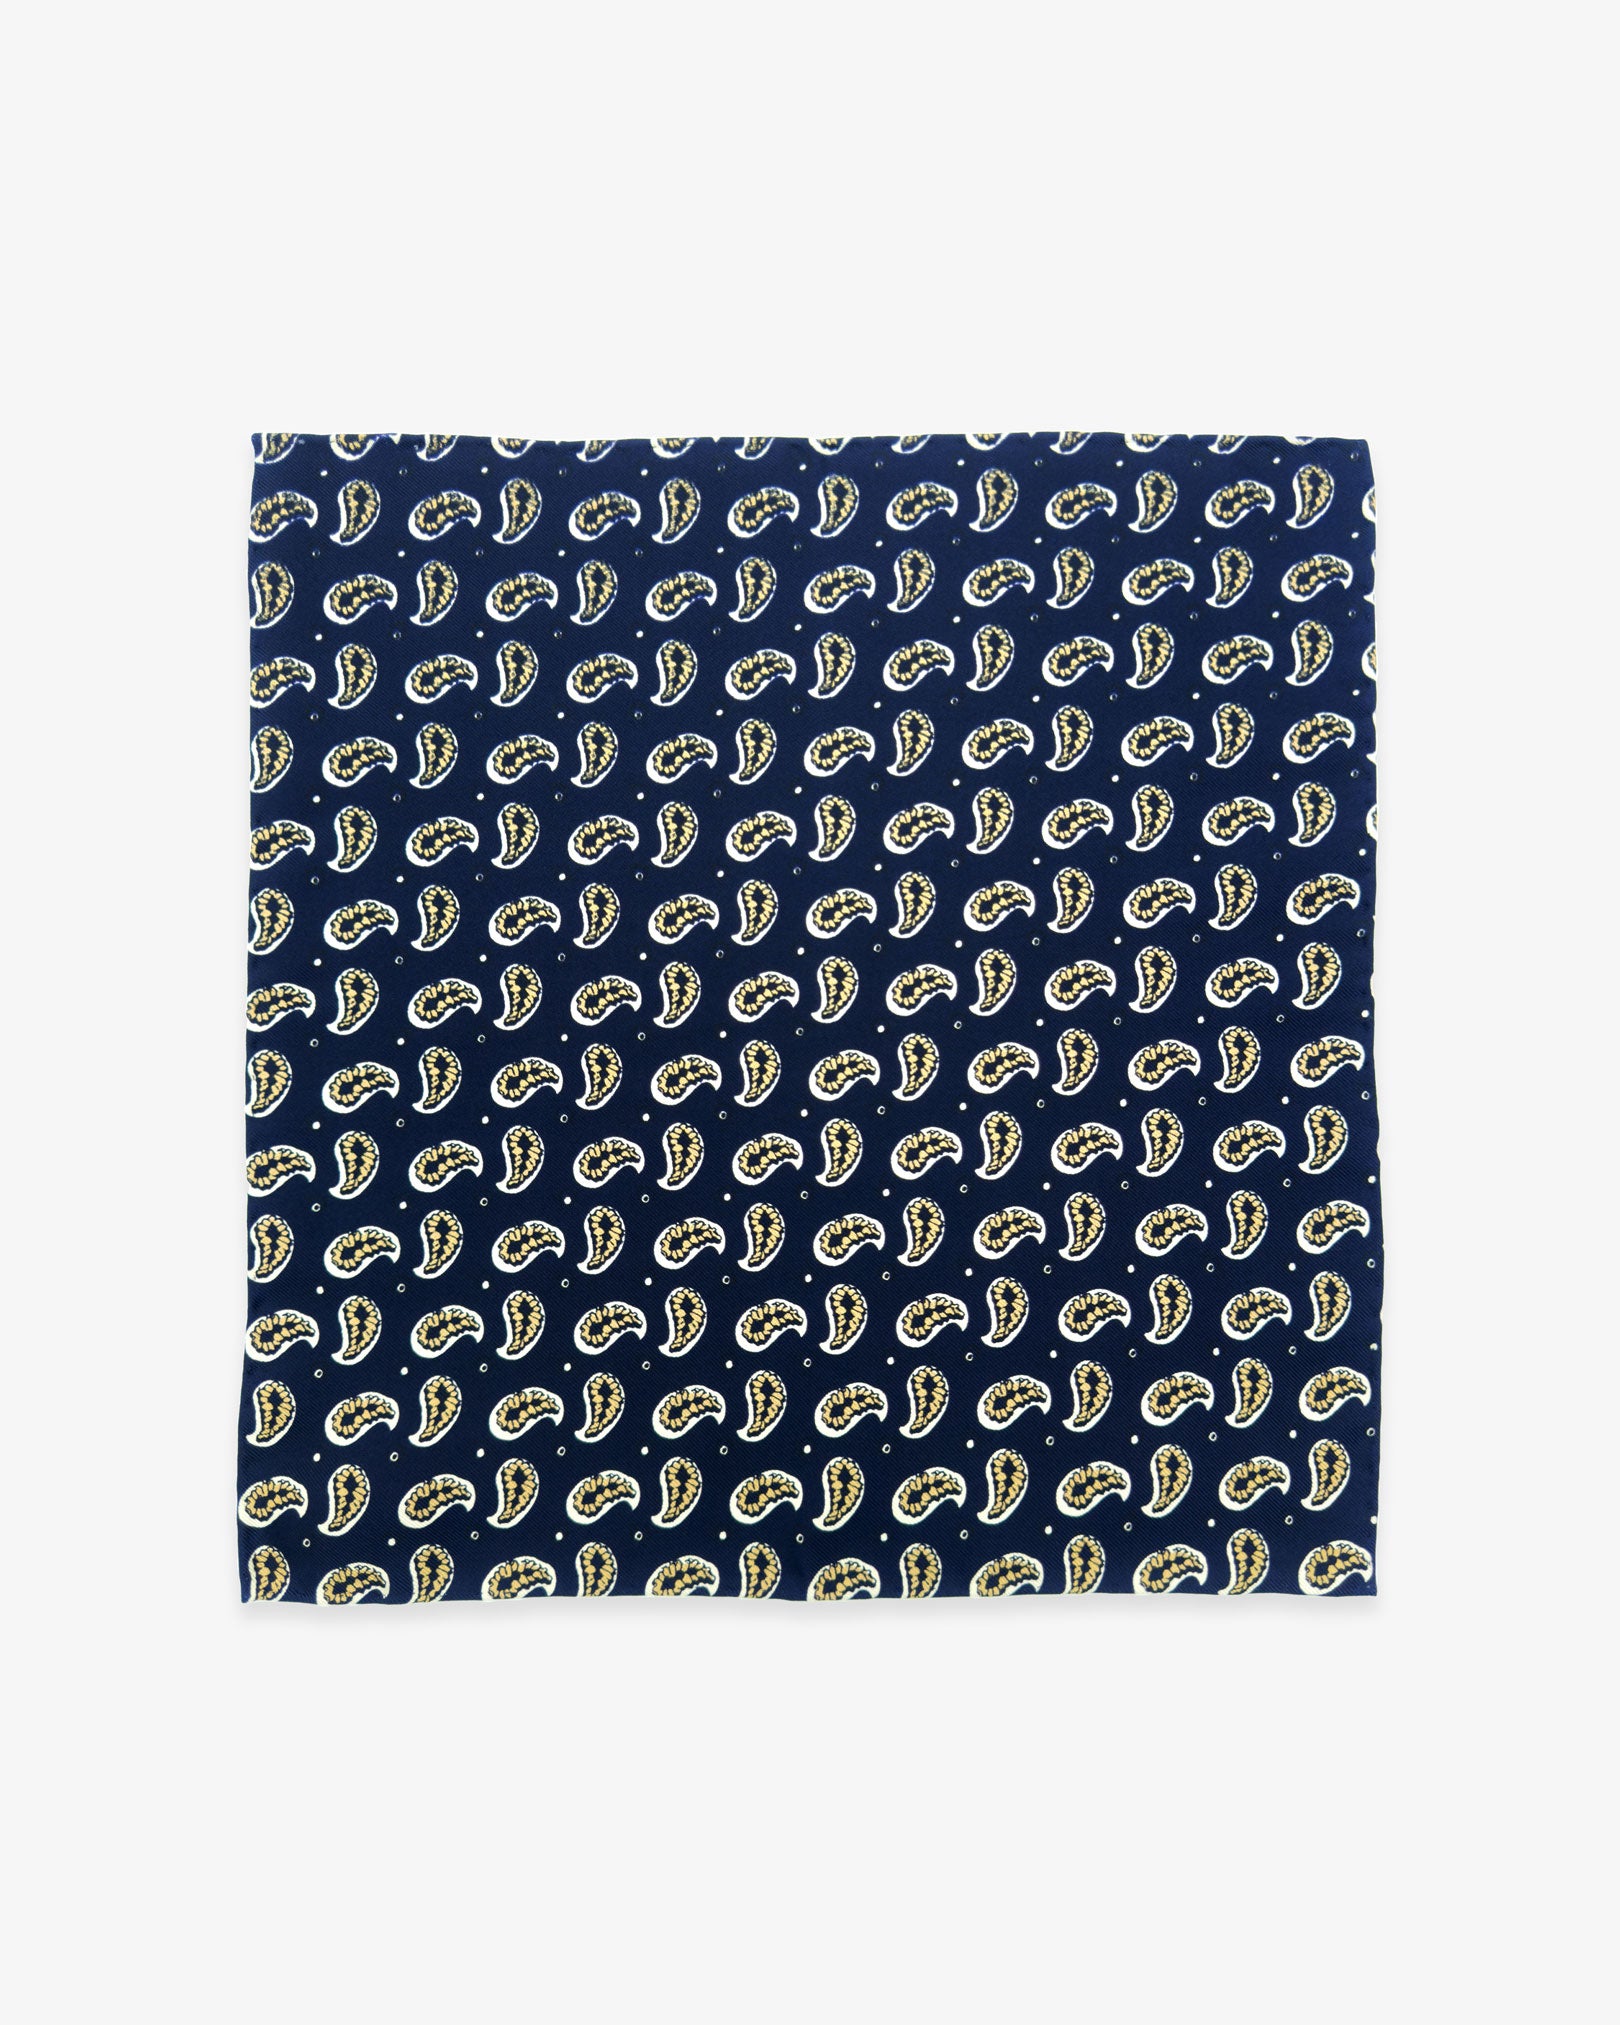 Fully unfolded 'Hadrian' English silk pocket square, showing the attractive linear paisley decoration against a navy blue background.